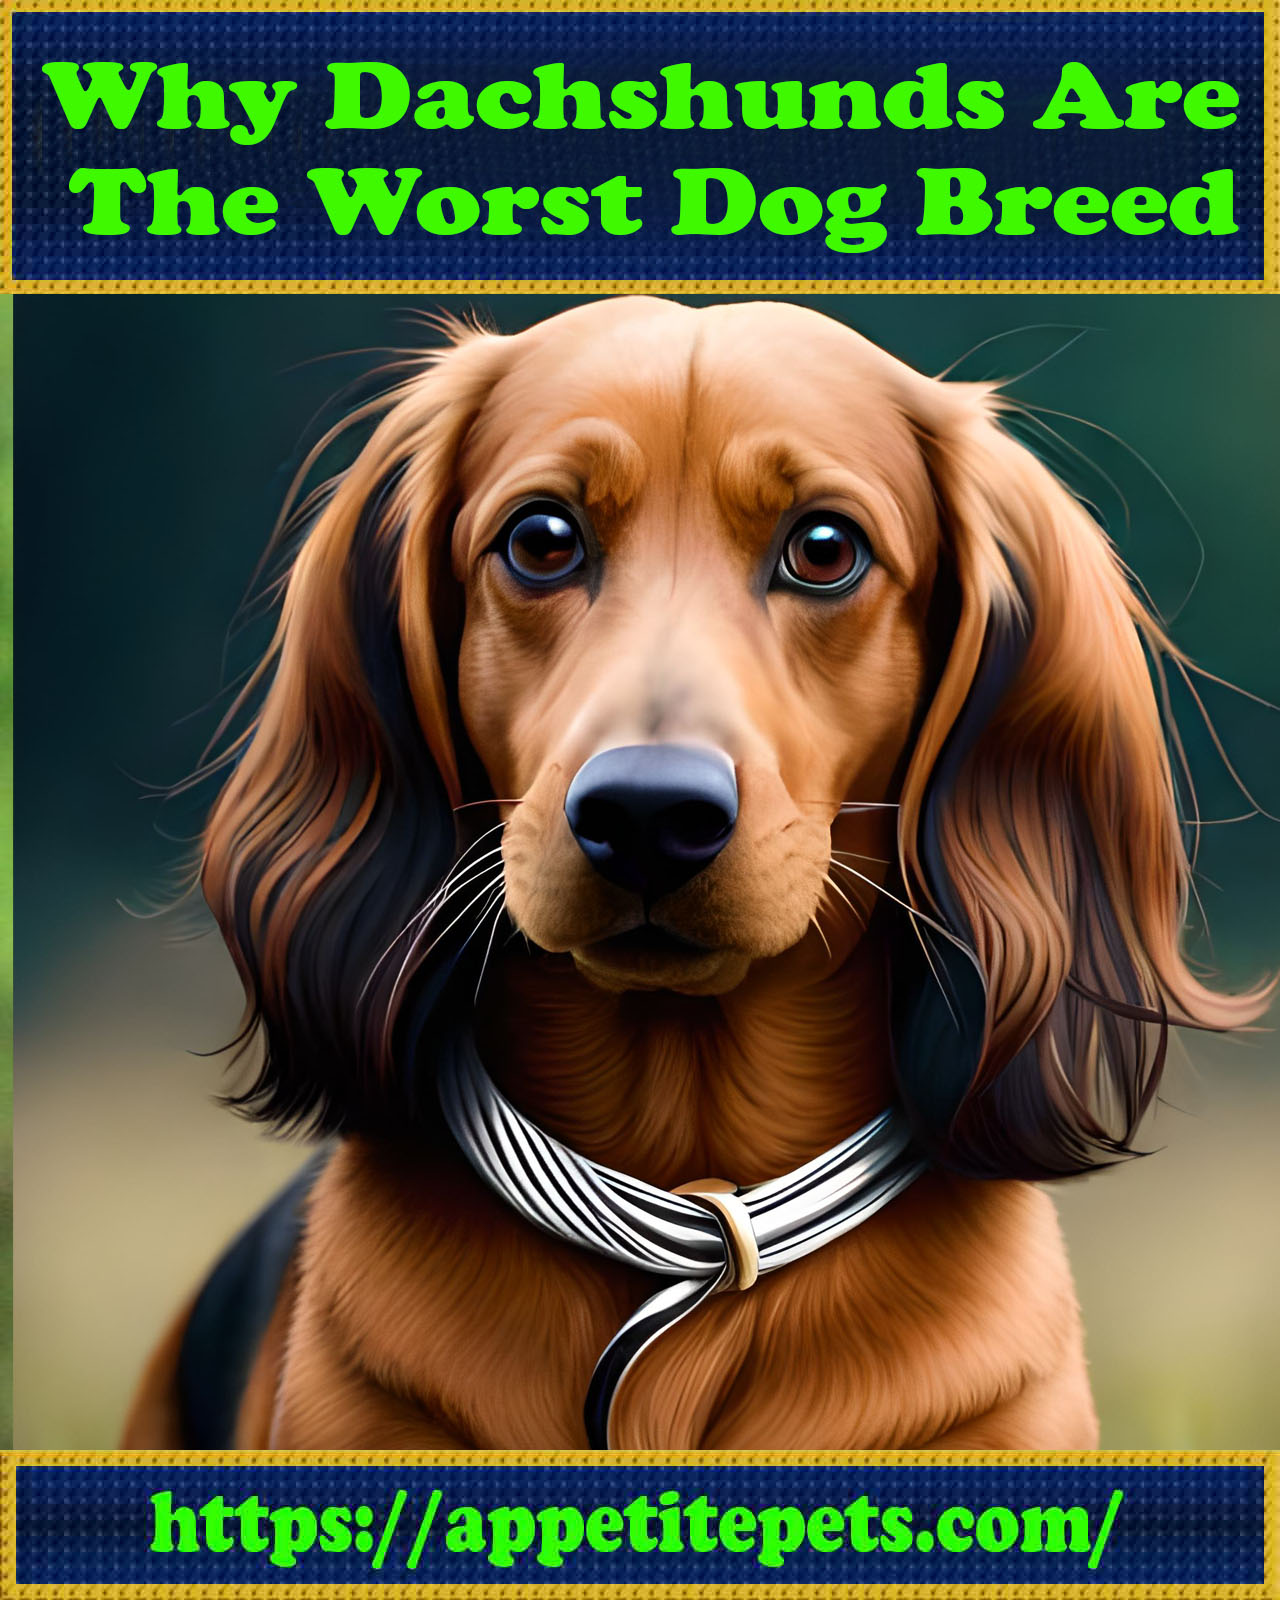 Why-Dachshunds-Are-the-Worst-Dog-Breed